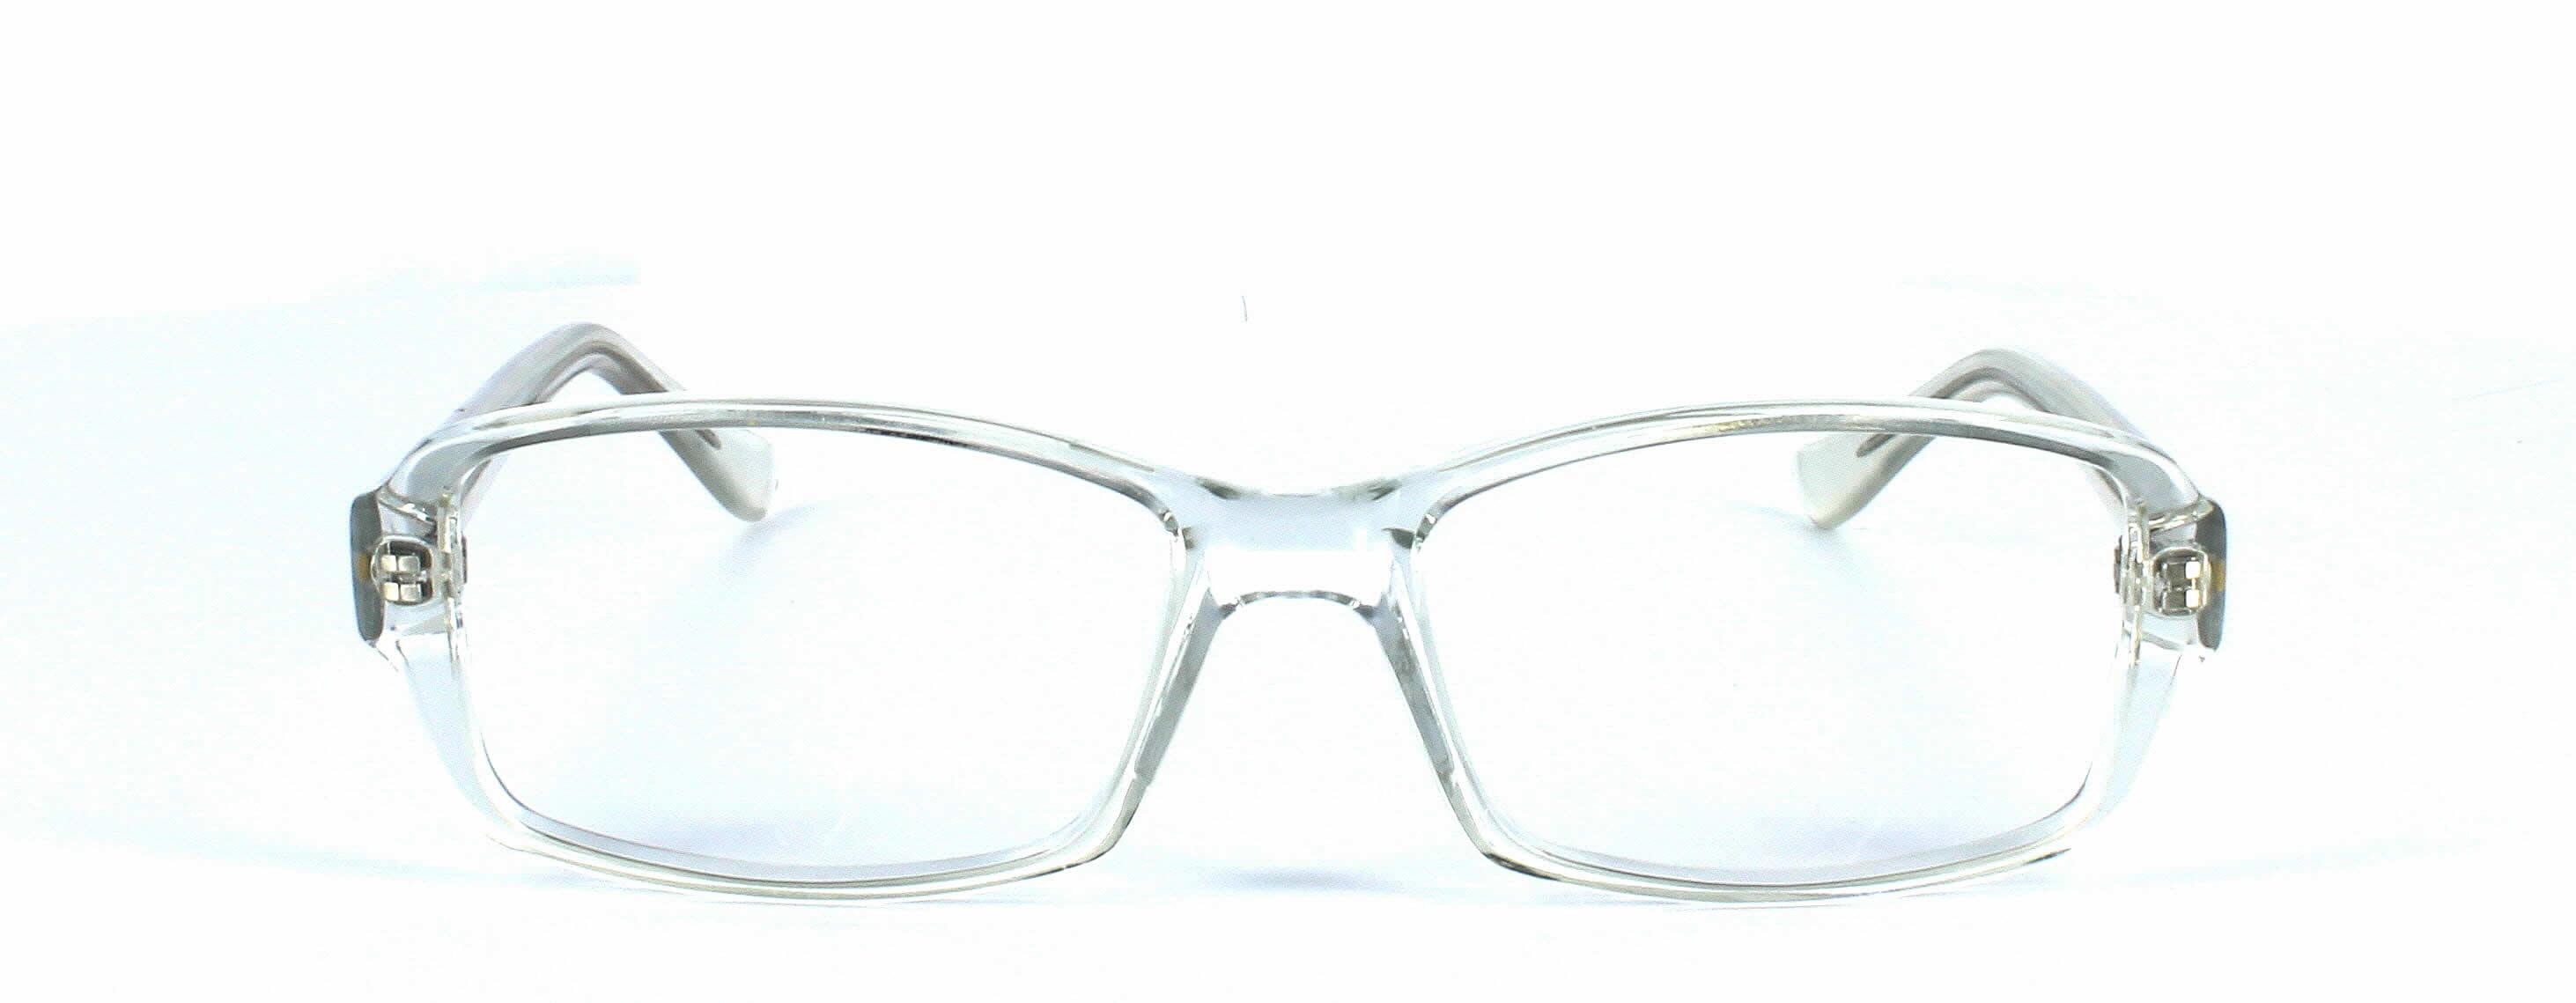 Chico - crystal clear rectangular shaped acetate glasses frames - image view 5